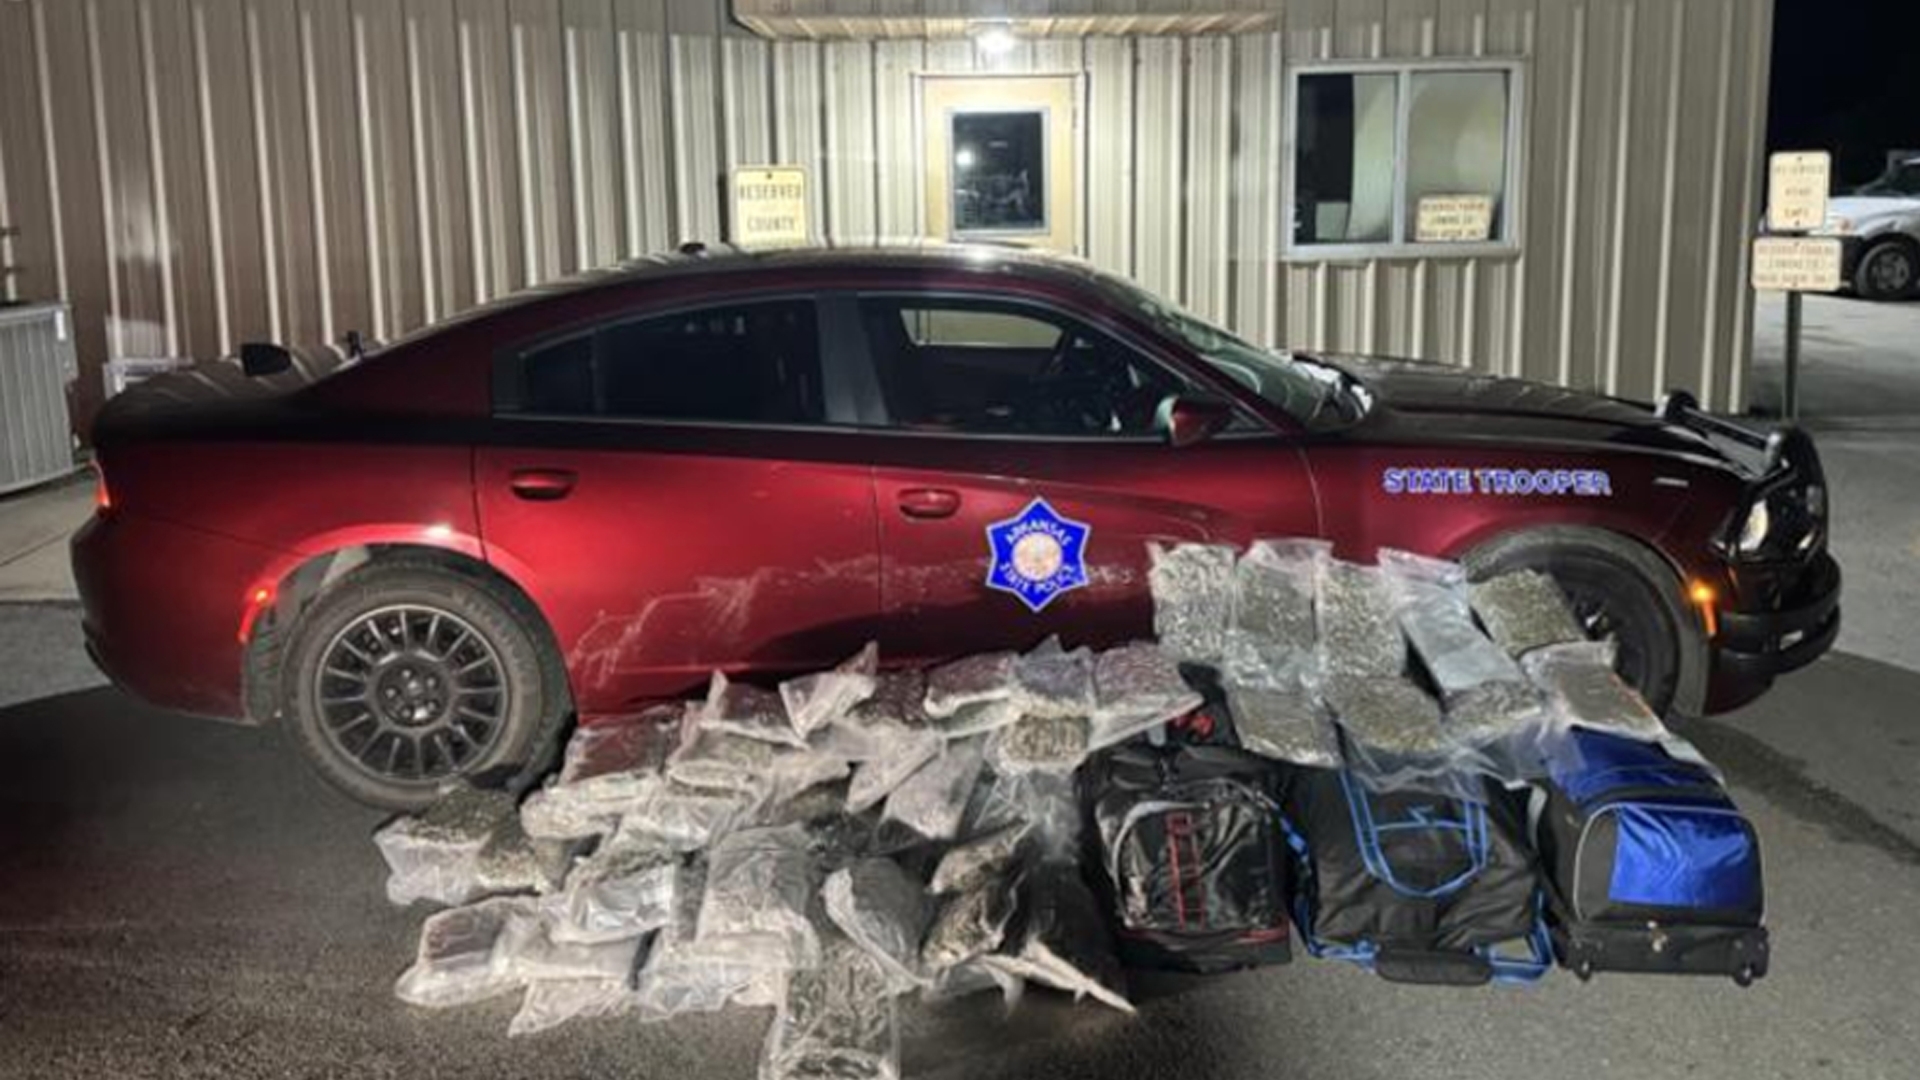 Arkansas State Police says 886 pounds of illegal narcotics and one handgun were seized during six traffic stops on Interstate 40 from April 25 to May 3.